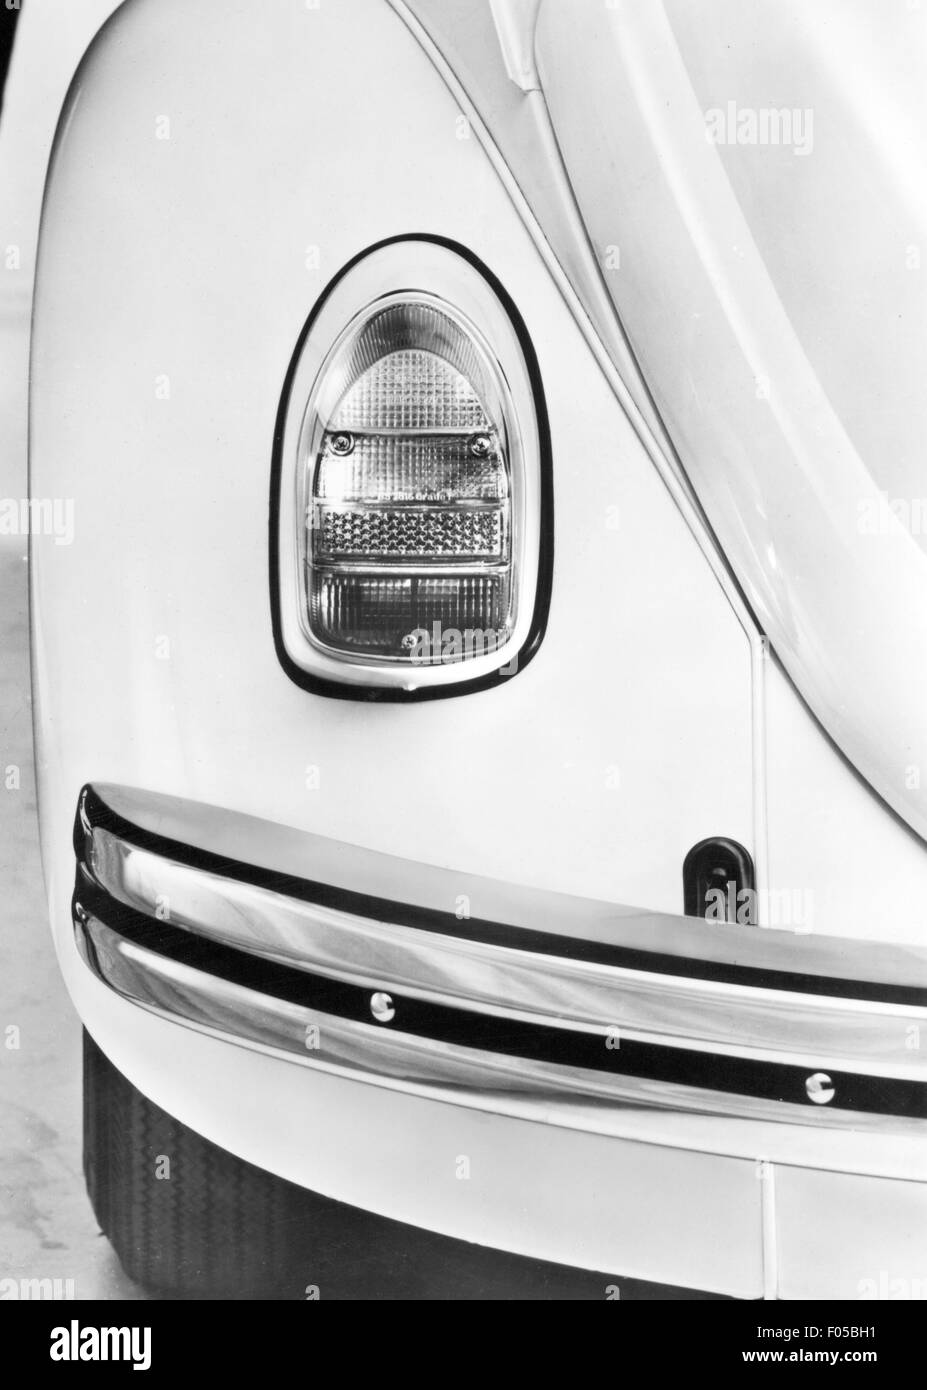 transport / transportation,car,vehicle variants,Volkswagen,VW Beetle 1300 and 1500,details,left rear lamp and bumper,1967,novelty,novelties,buffer,buffers,behind,back,back side,backs,passenger motor vehicle,motor car,auto,automobile,passenger car,motorcar,motorcars,autos,automobiles,passenger cars,Germany,1960s,60s,20th century,no-people,transport,transportation,car,cars,beetle,bug,beetles,bugs,details,detail,left-hand,the left-hand lane,on the left-hand side,the left,rear lamp,rear light,rear lamps,rear lights,b,Additional-Rights-Clearences-Not Available Stock Photo